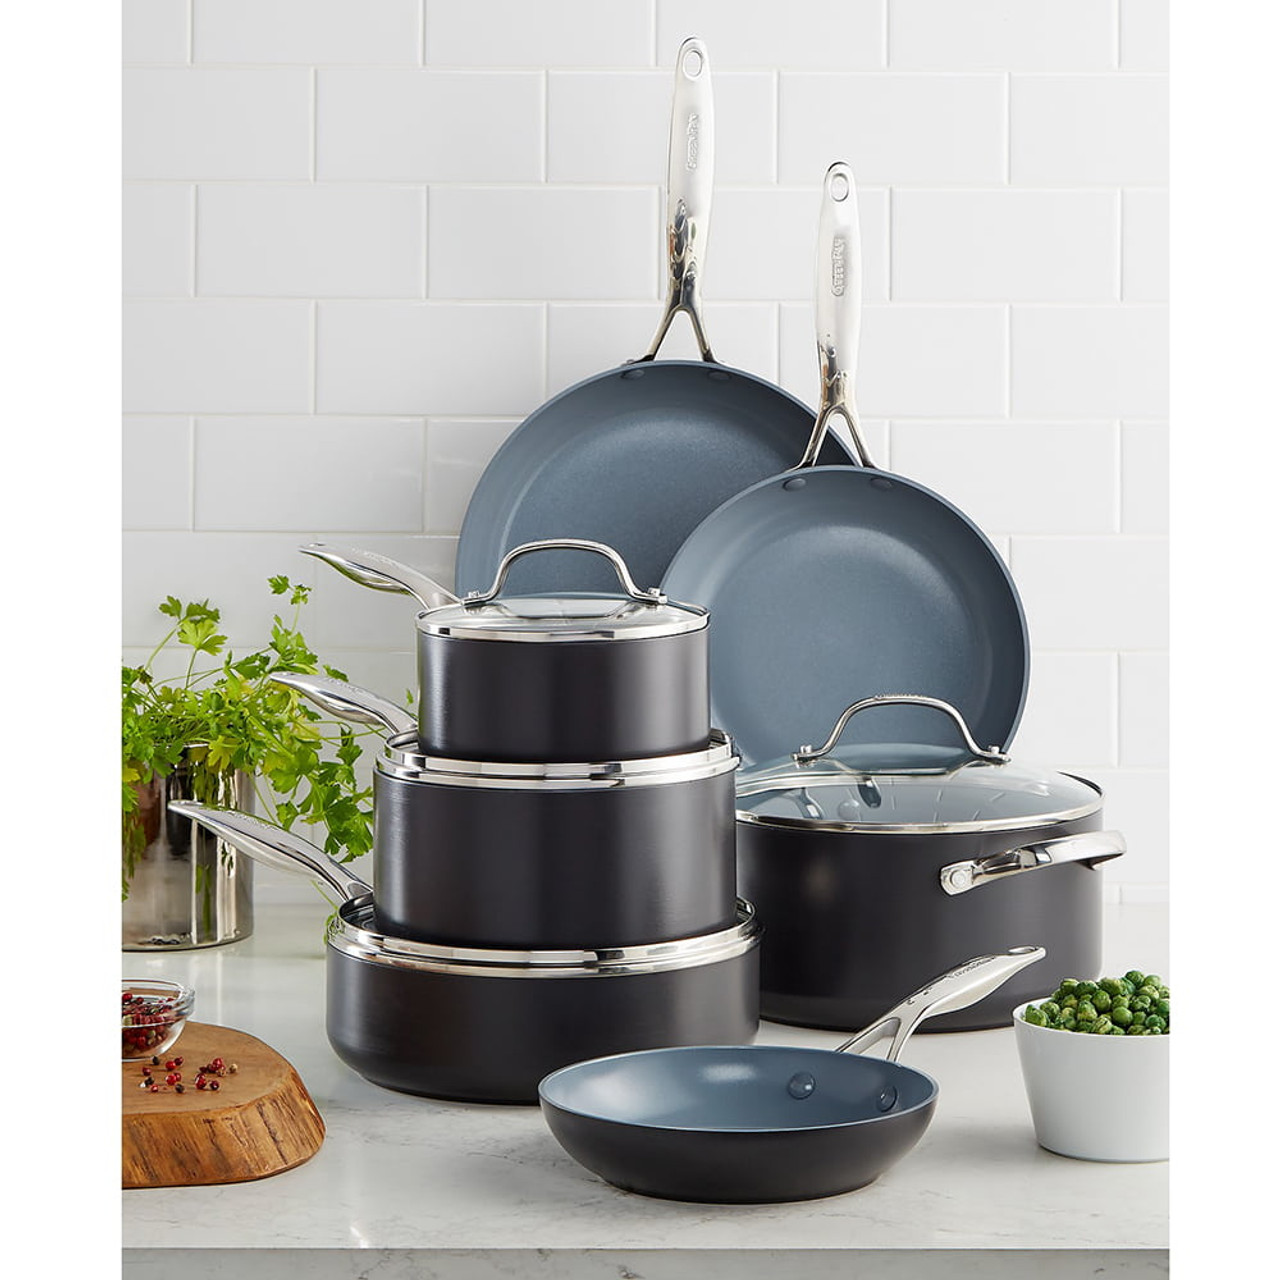 https://cdn11.bigcommerce.com/s-hccytny0od/images/stencil/1280x1280/products/2914/10311/greenpan-valencia-pro-11pc-cookware-set-1__60730.1594155829.jpg?c=2?imbypass=on